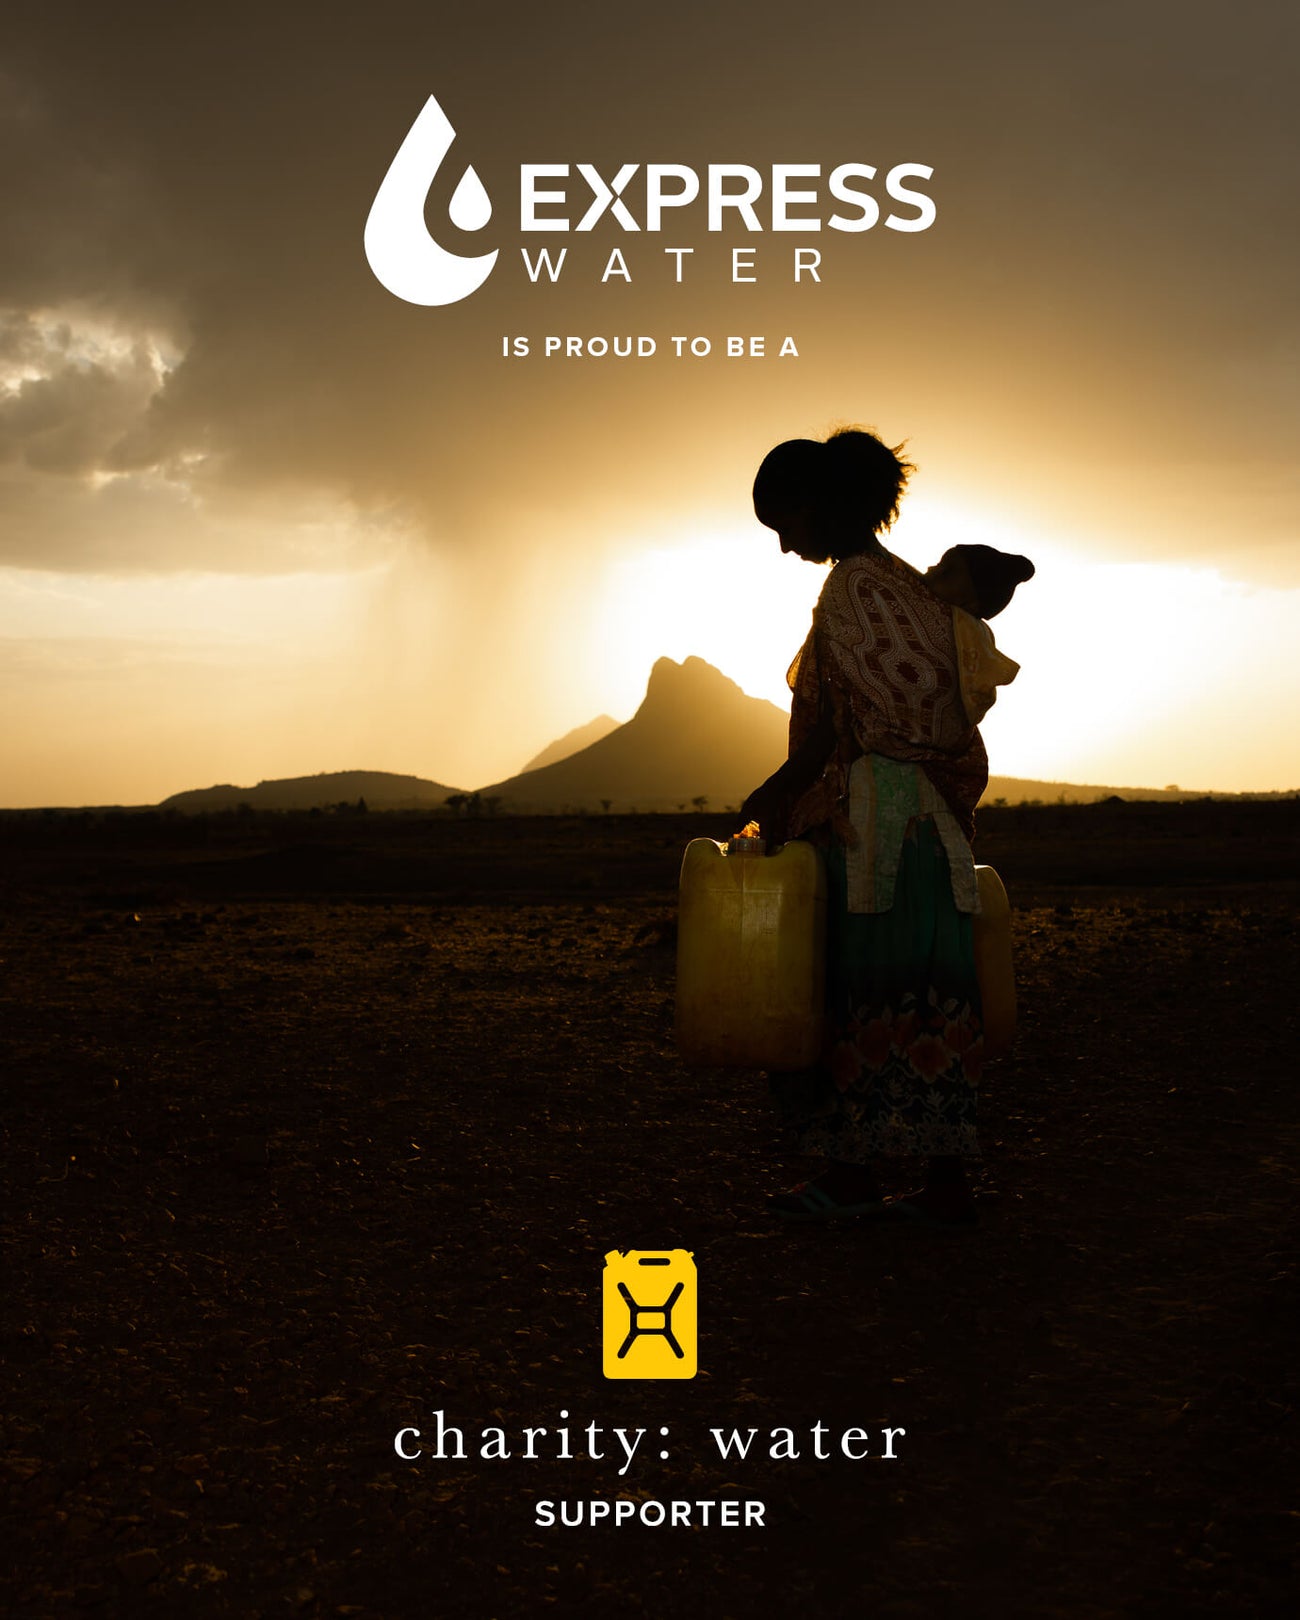 Express Water is proud to be a charity: water Supporter